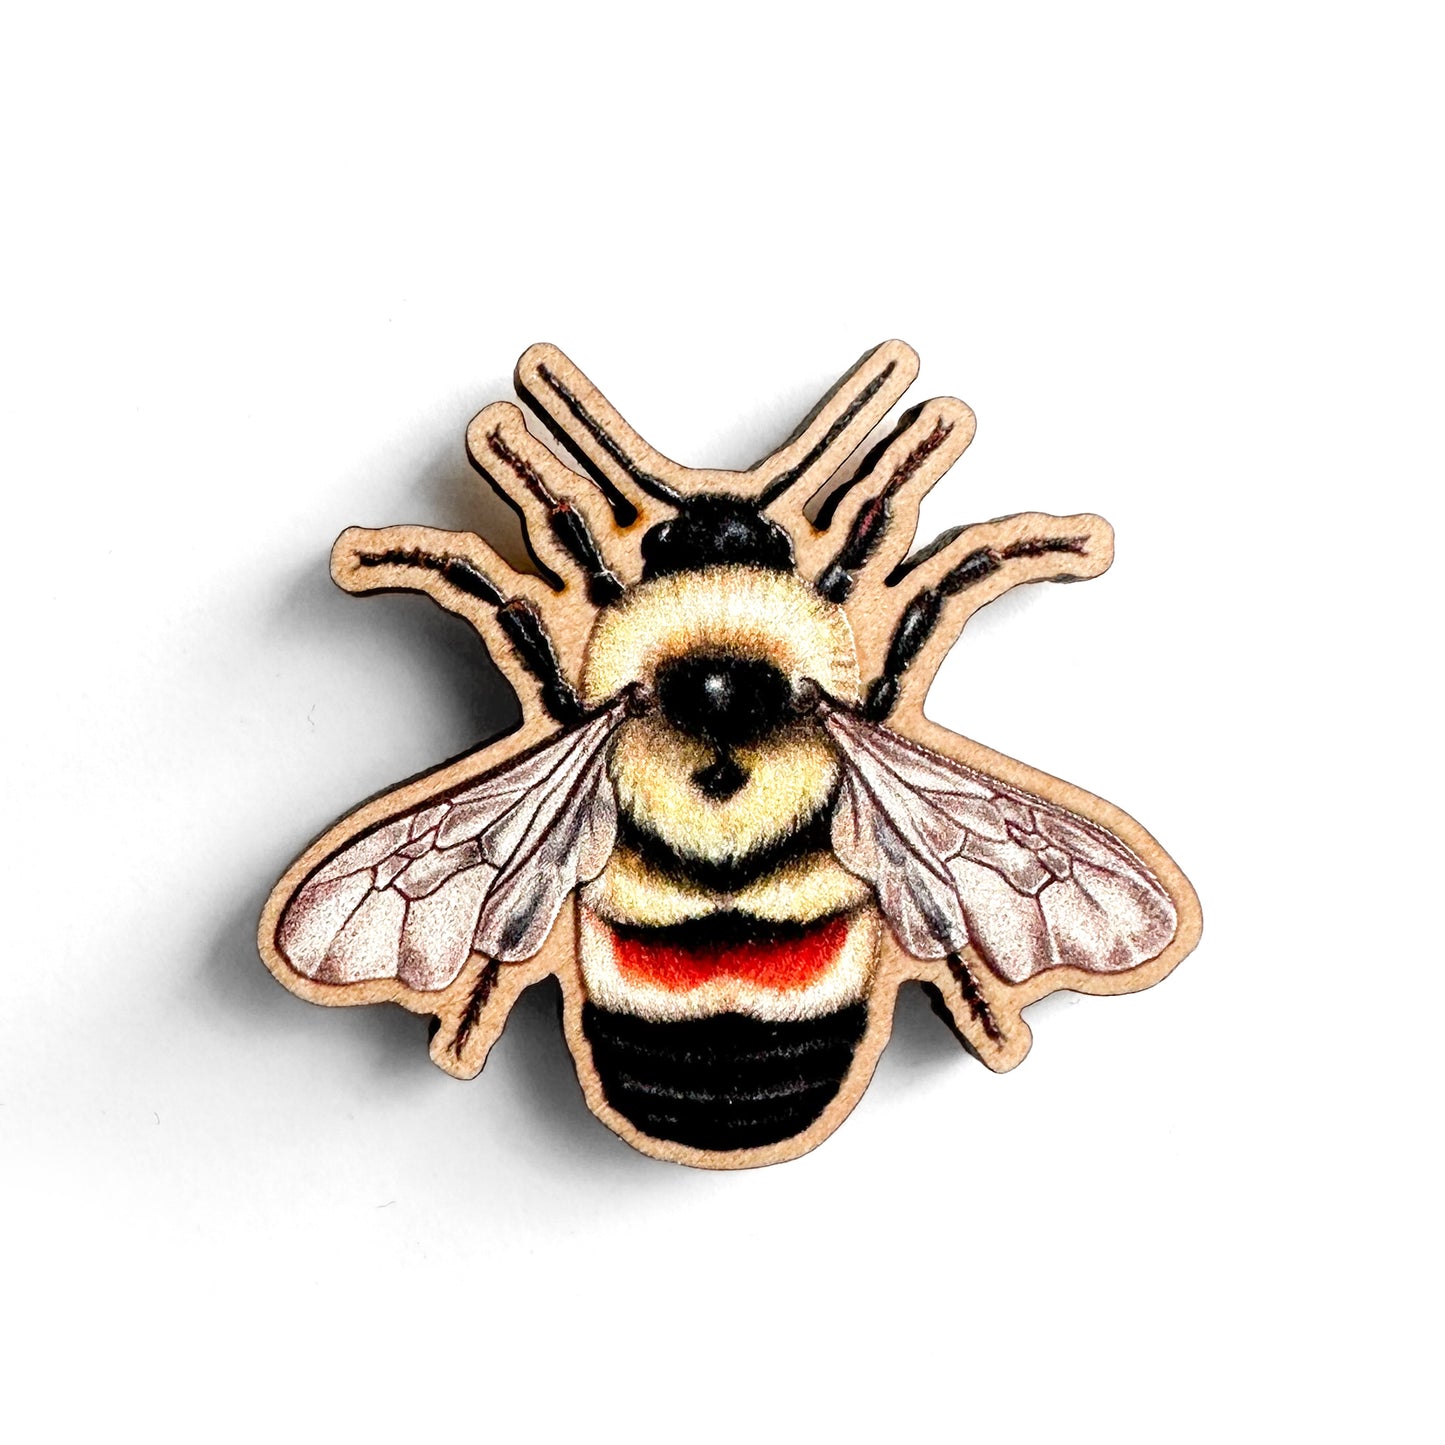 Rusty Patched Bumble Bee Pin